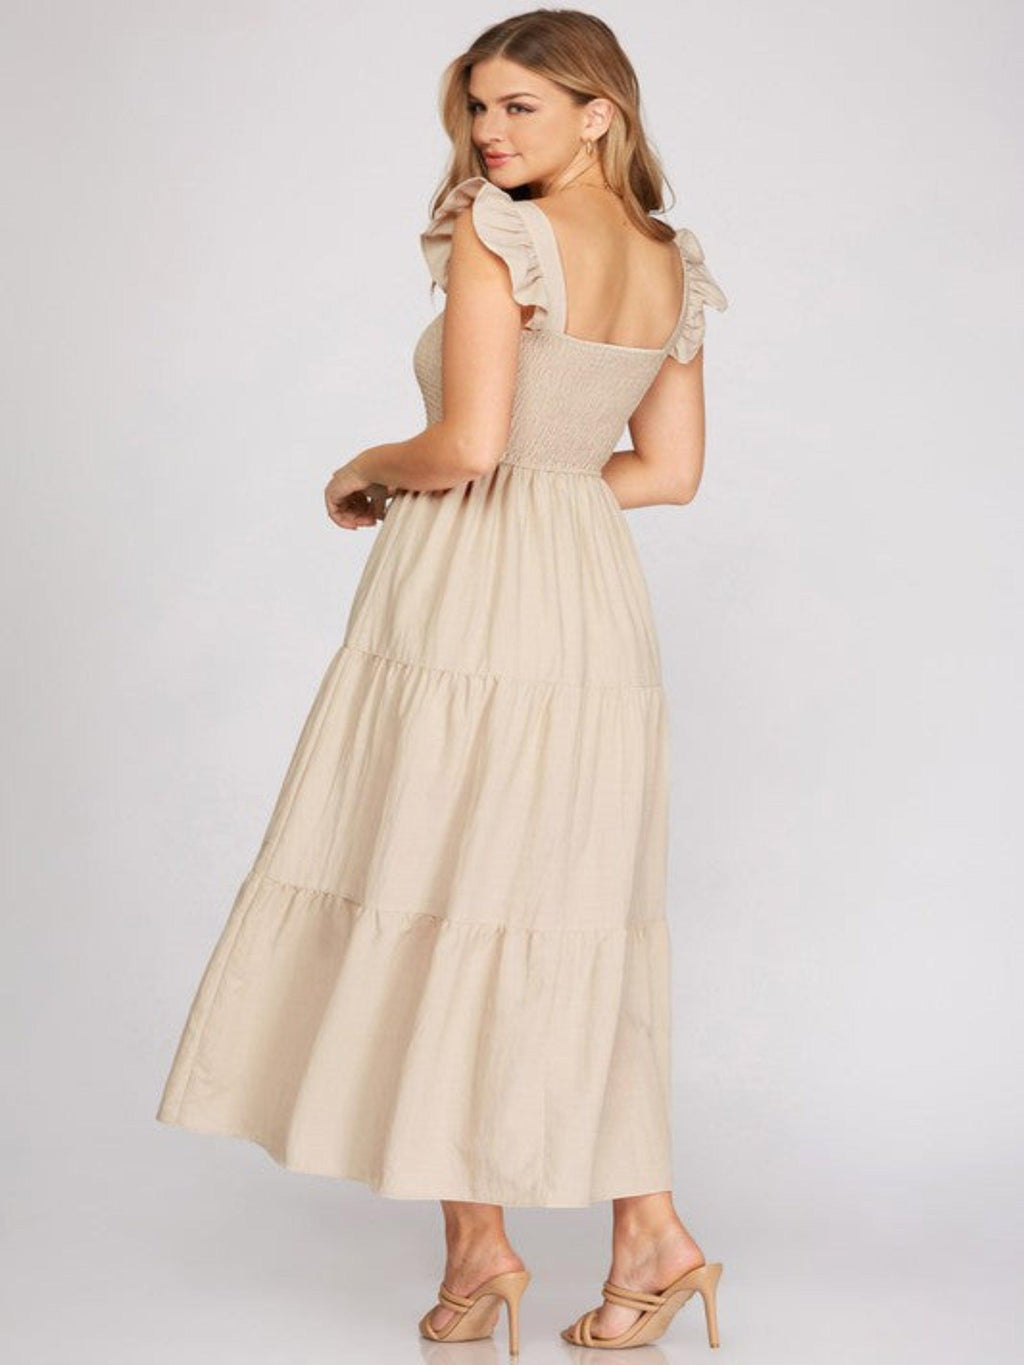 DAY DREAMER DRESS-TAUPE